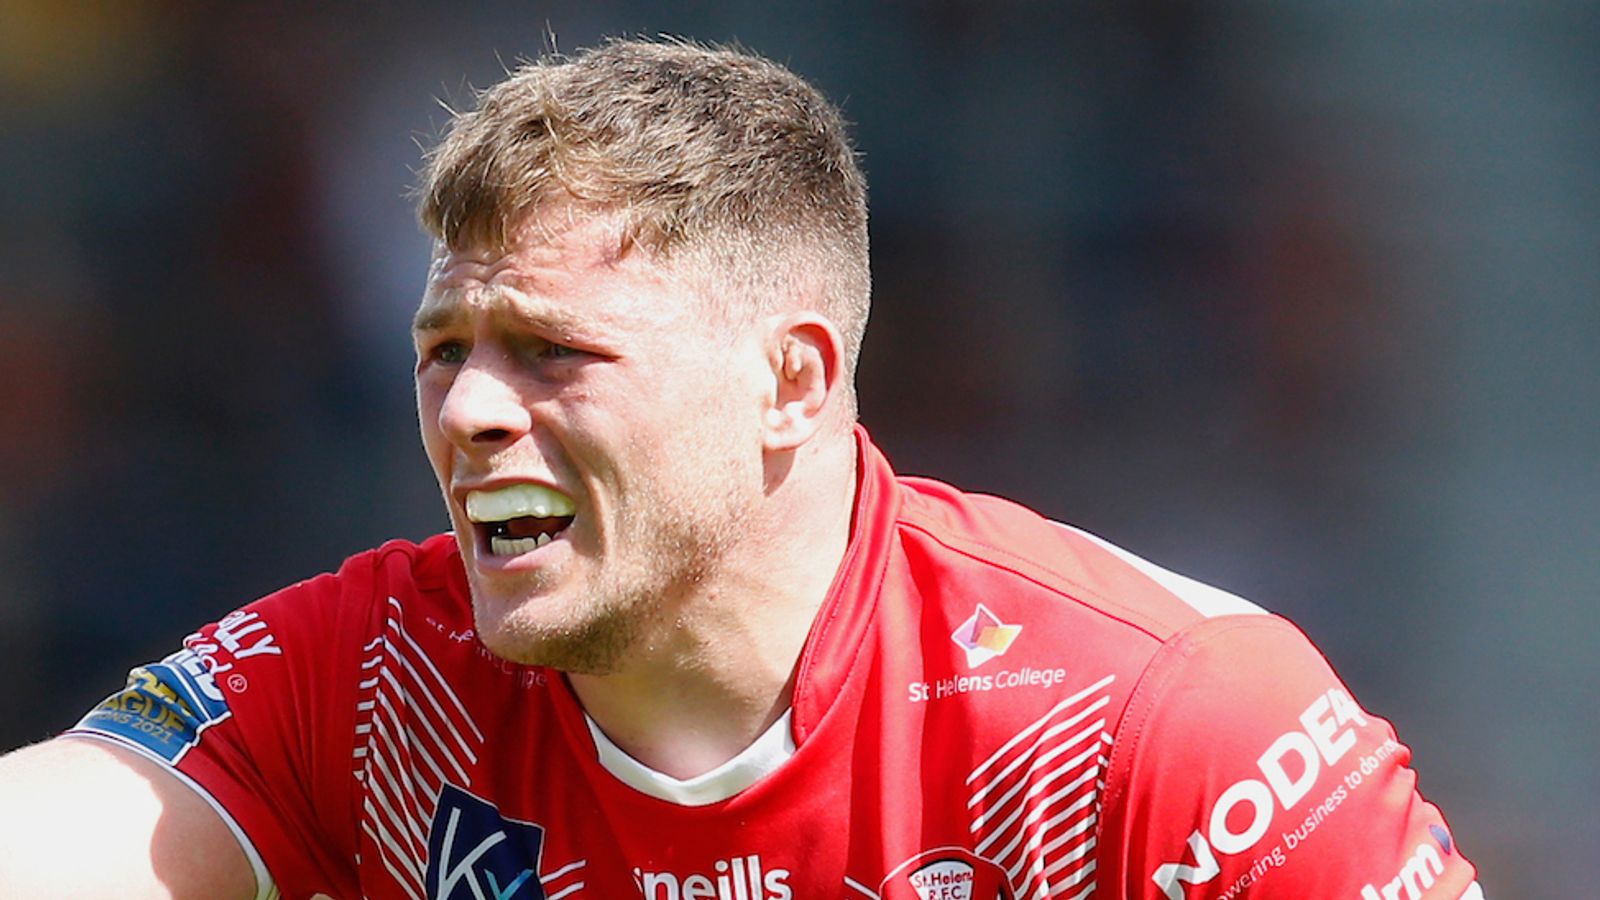 St Helens’ Morgan Knowles to play in Grand Final after winning second appeal against suspension